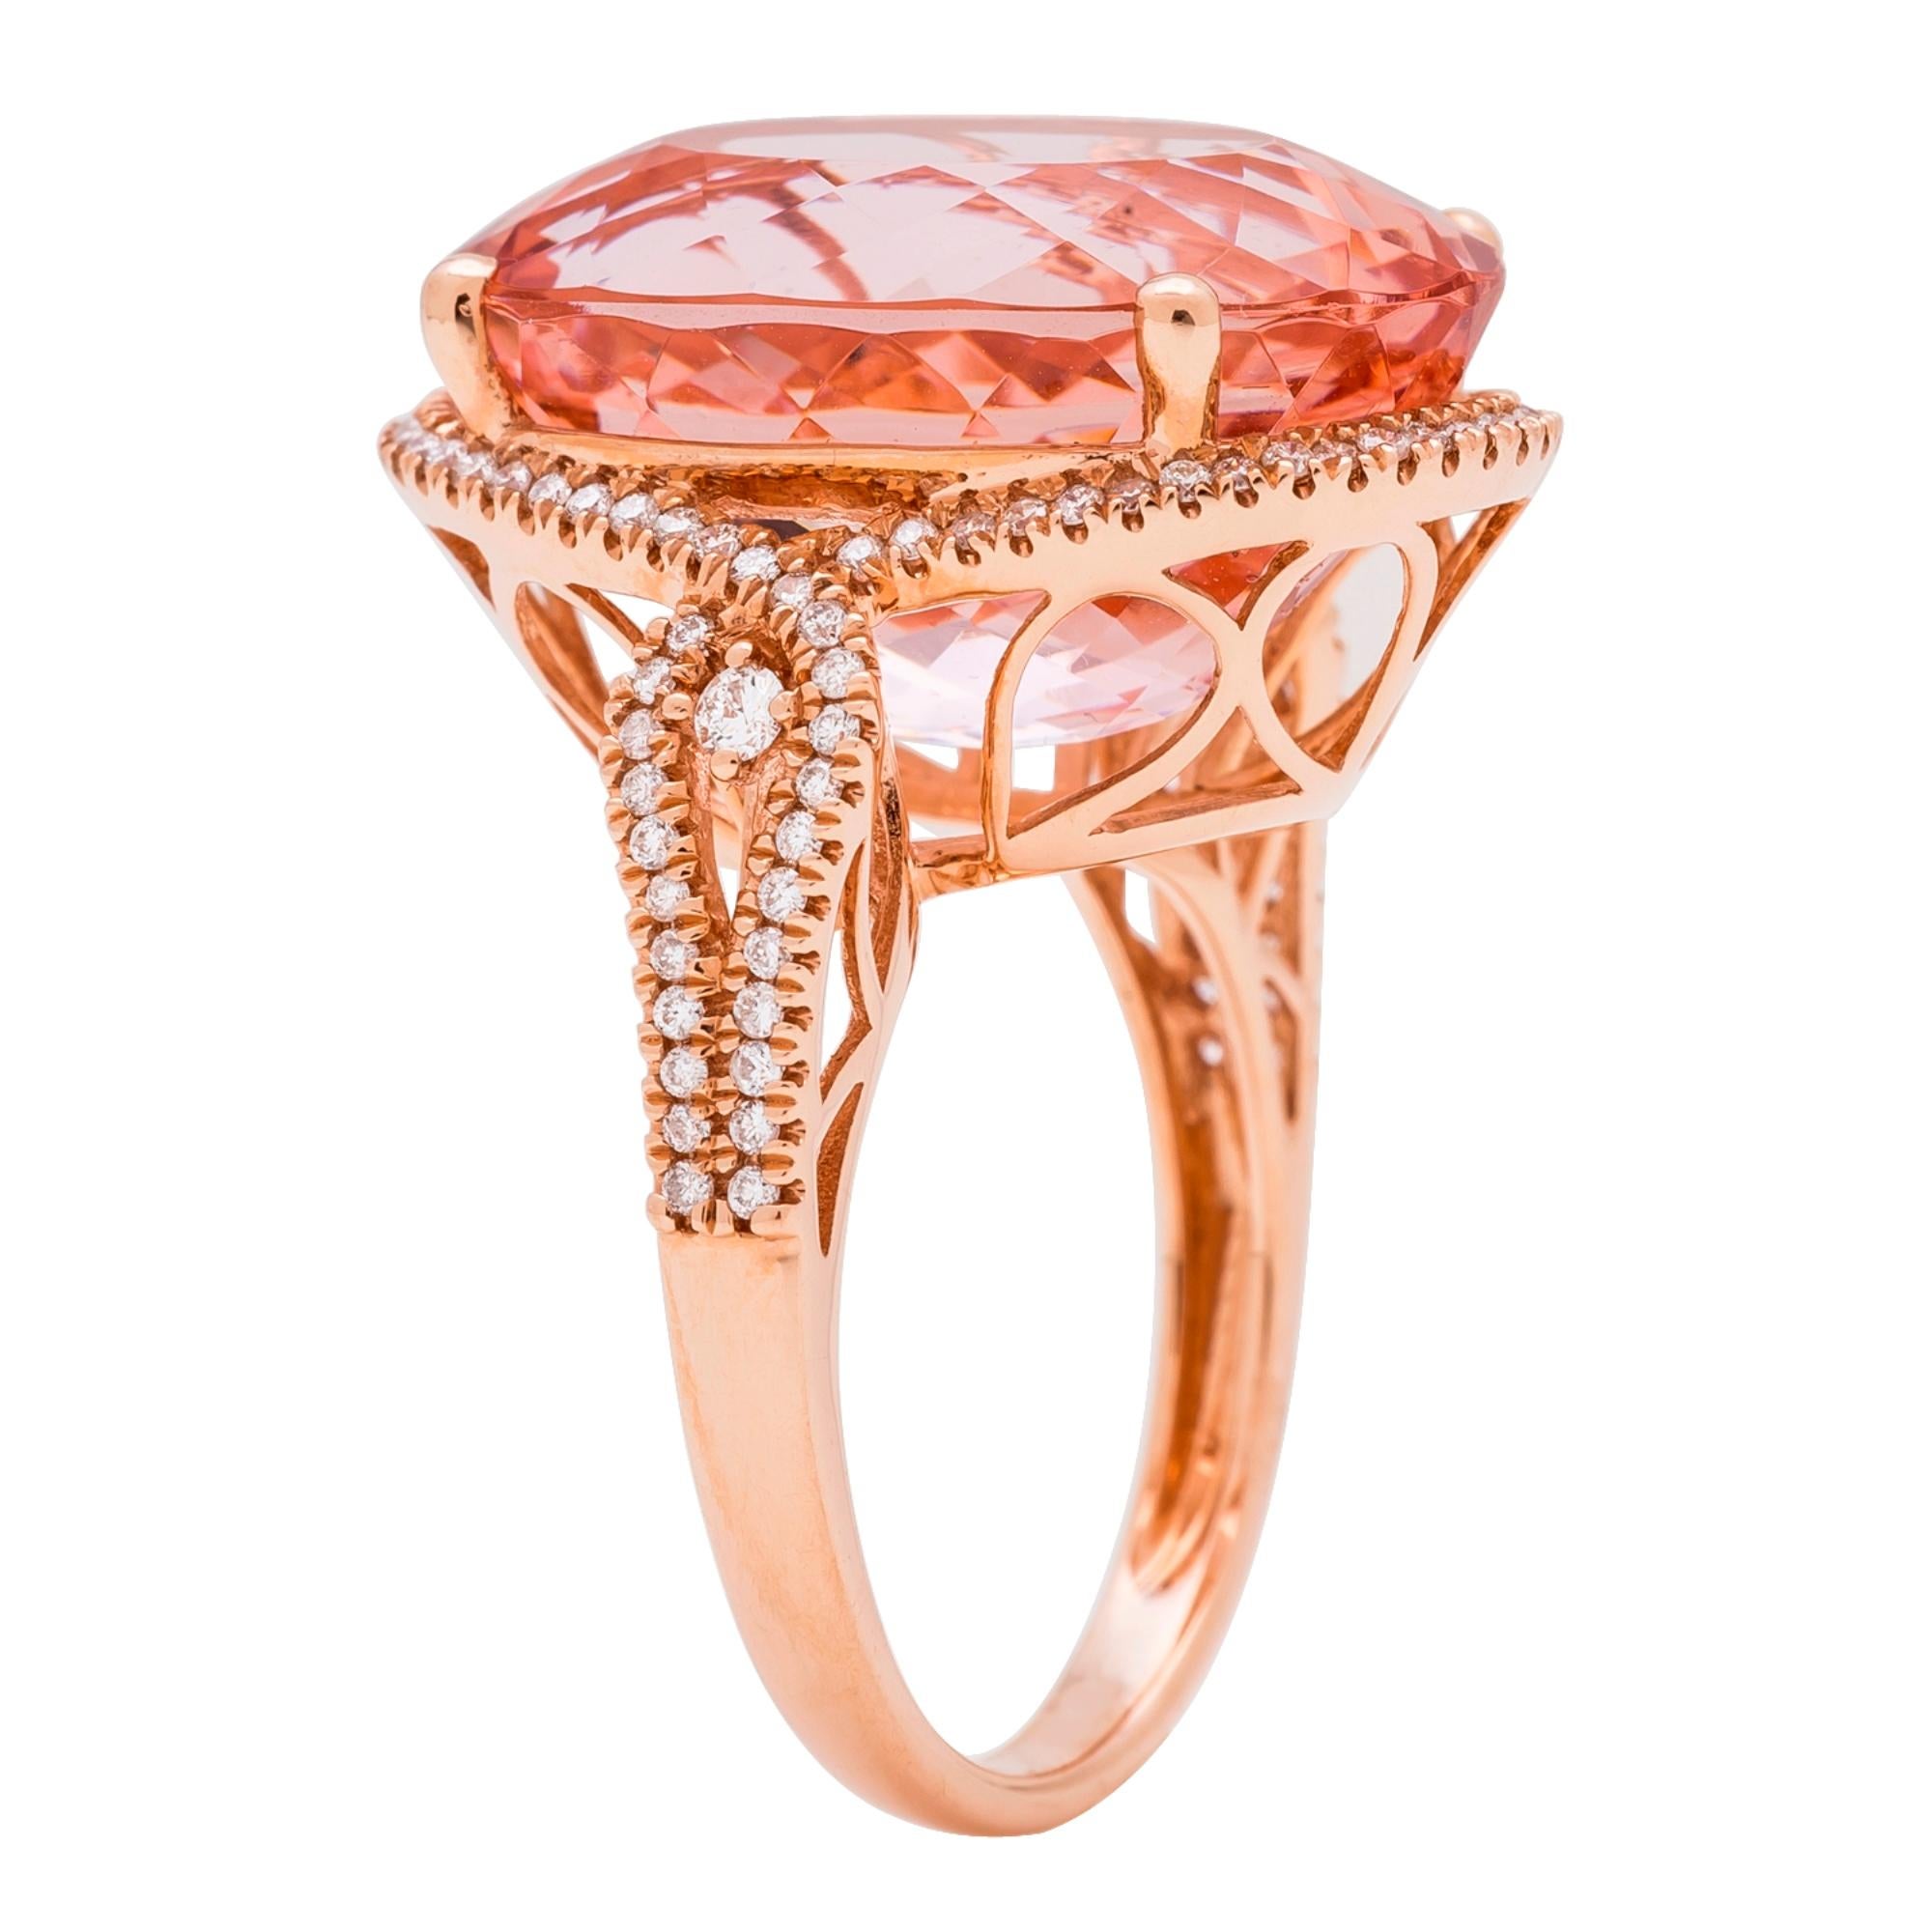 Decorate yourself in elegance with this Ring is crafted from 14-karat Rose Gold by Gin & Grace. This Ring is made up of 16x21 mm Oval-Cut (1 pcs) 22.55 carat Morganite and Round-cut White Diamond (104 Pcs) 0.42 Carat. This Ring is weight 6.05 grams.